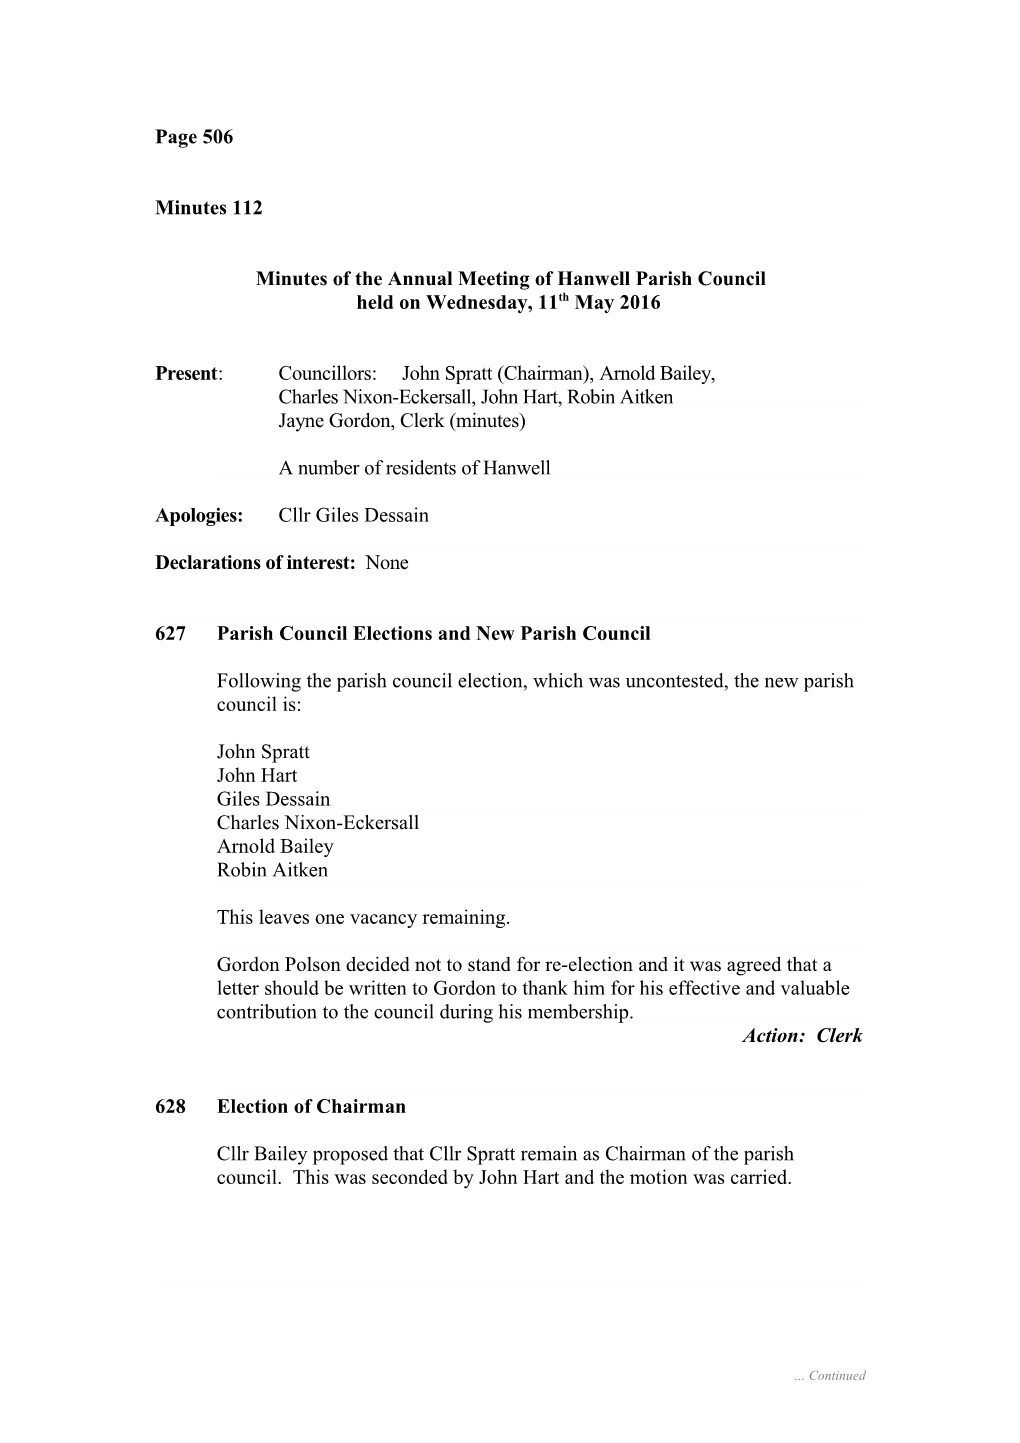 Minutes of the Annual Meeting of Hanwell Parish Council